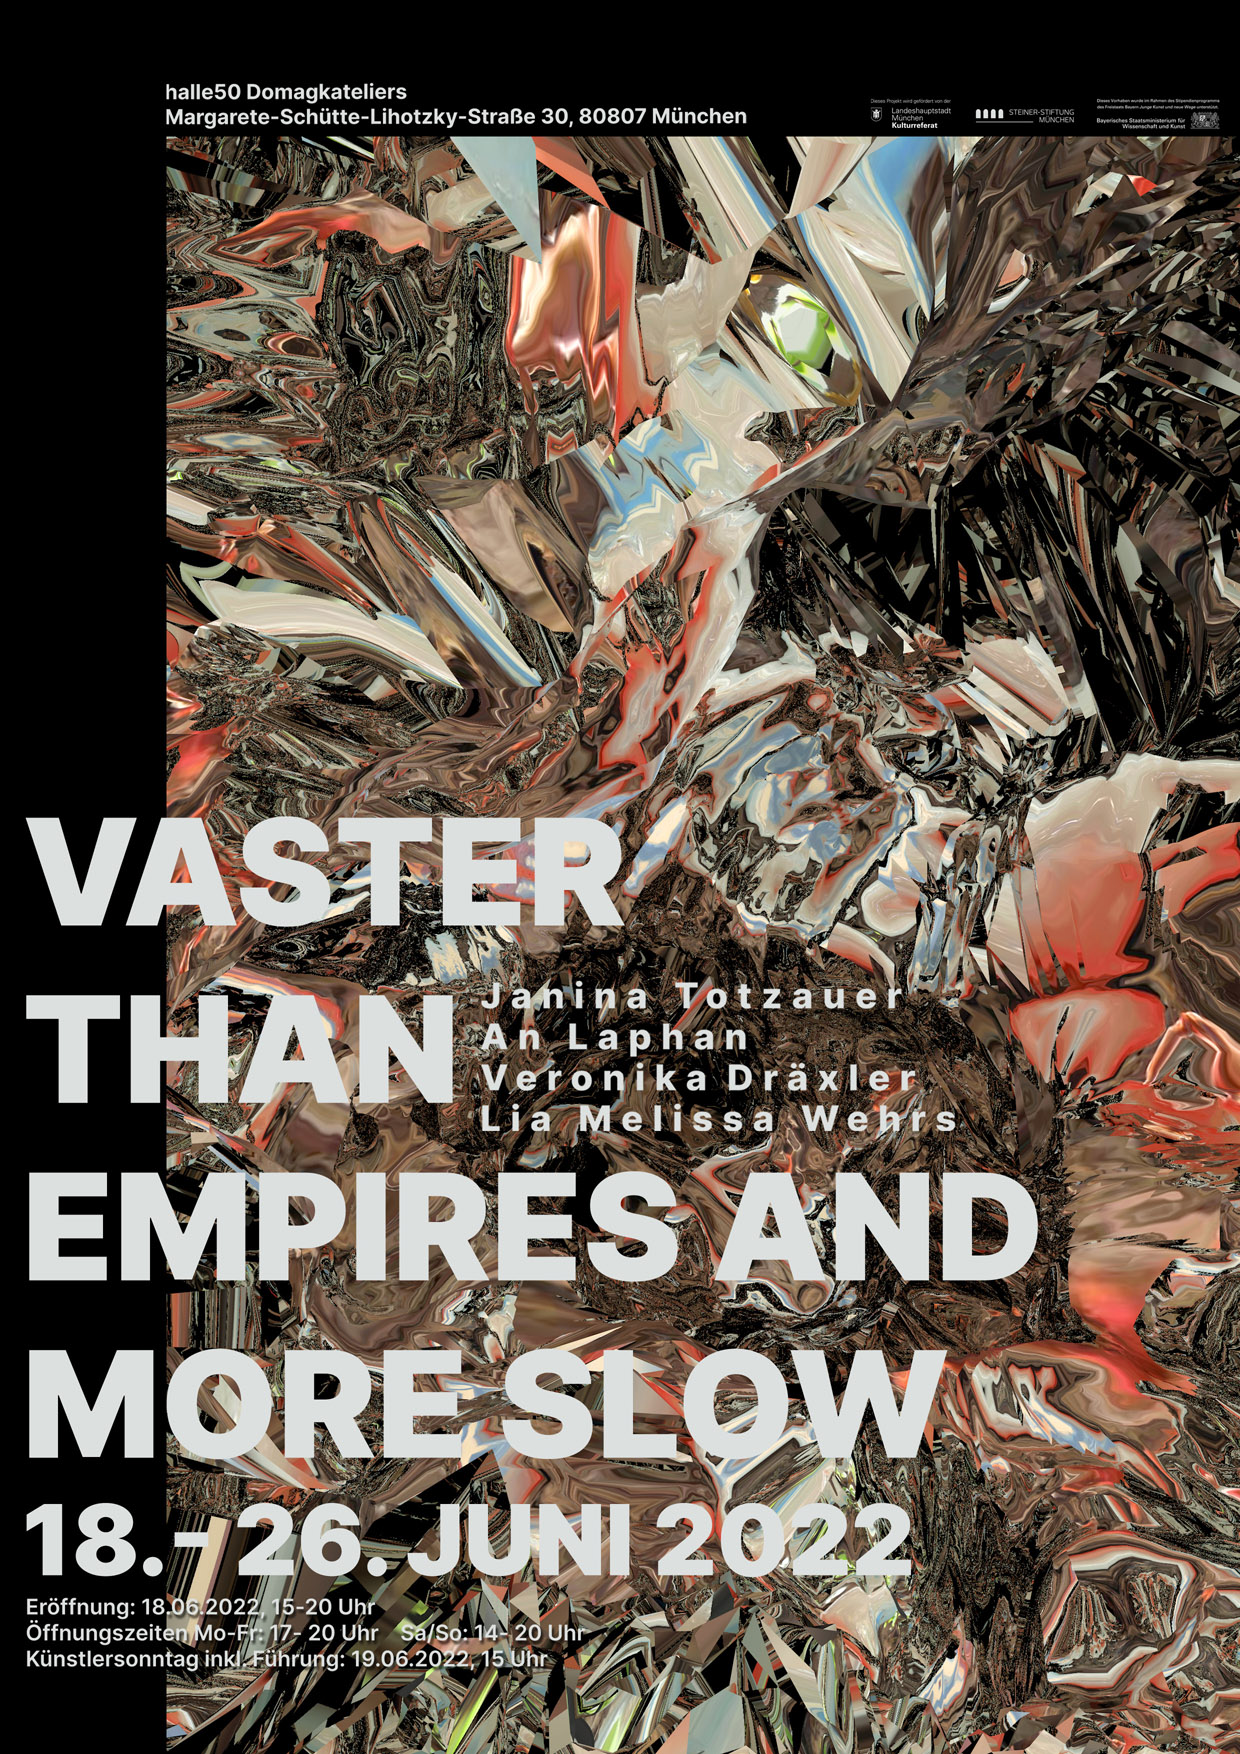 Vaster Than Empires And More Slow (June 18-26 2022)